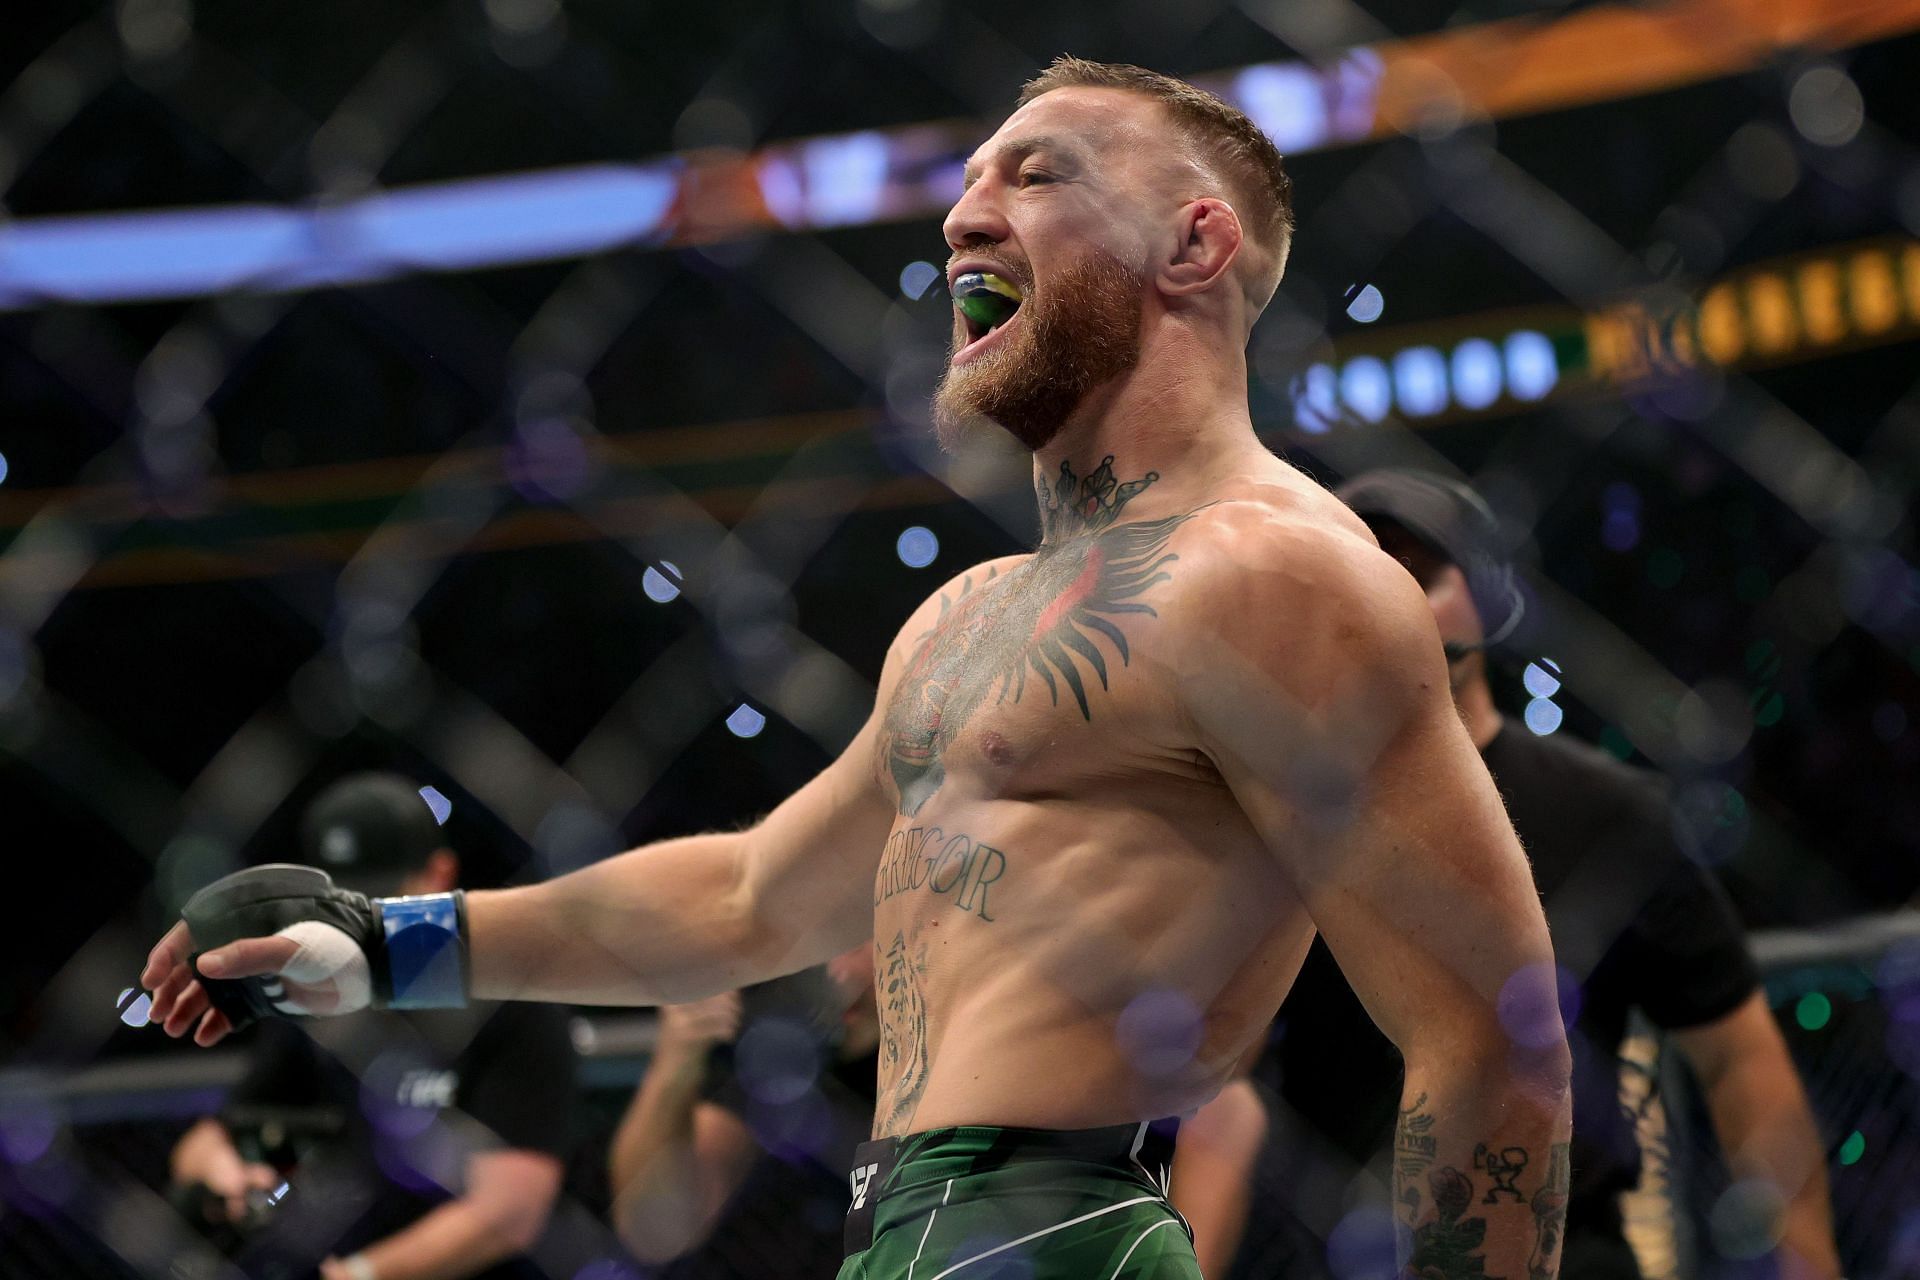 McGregor is ranked No.9 with a record of 22-6